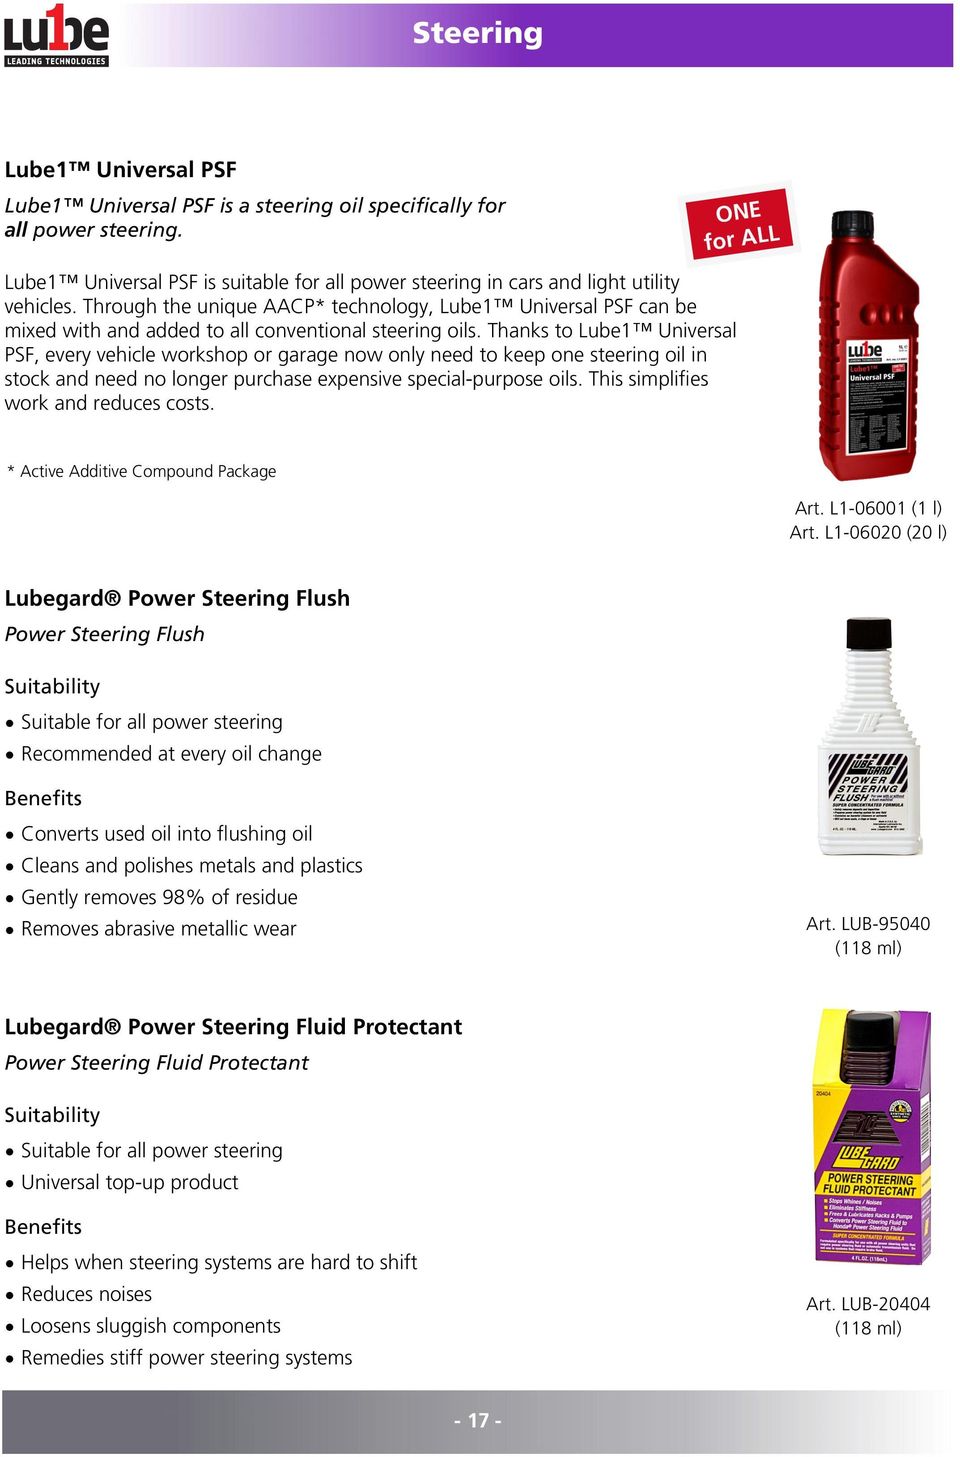 Through the unique AACP* technology, Lube1 Universal PSF can be mixed with and added to all conventional steering oils.